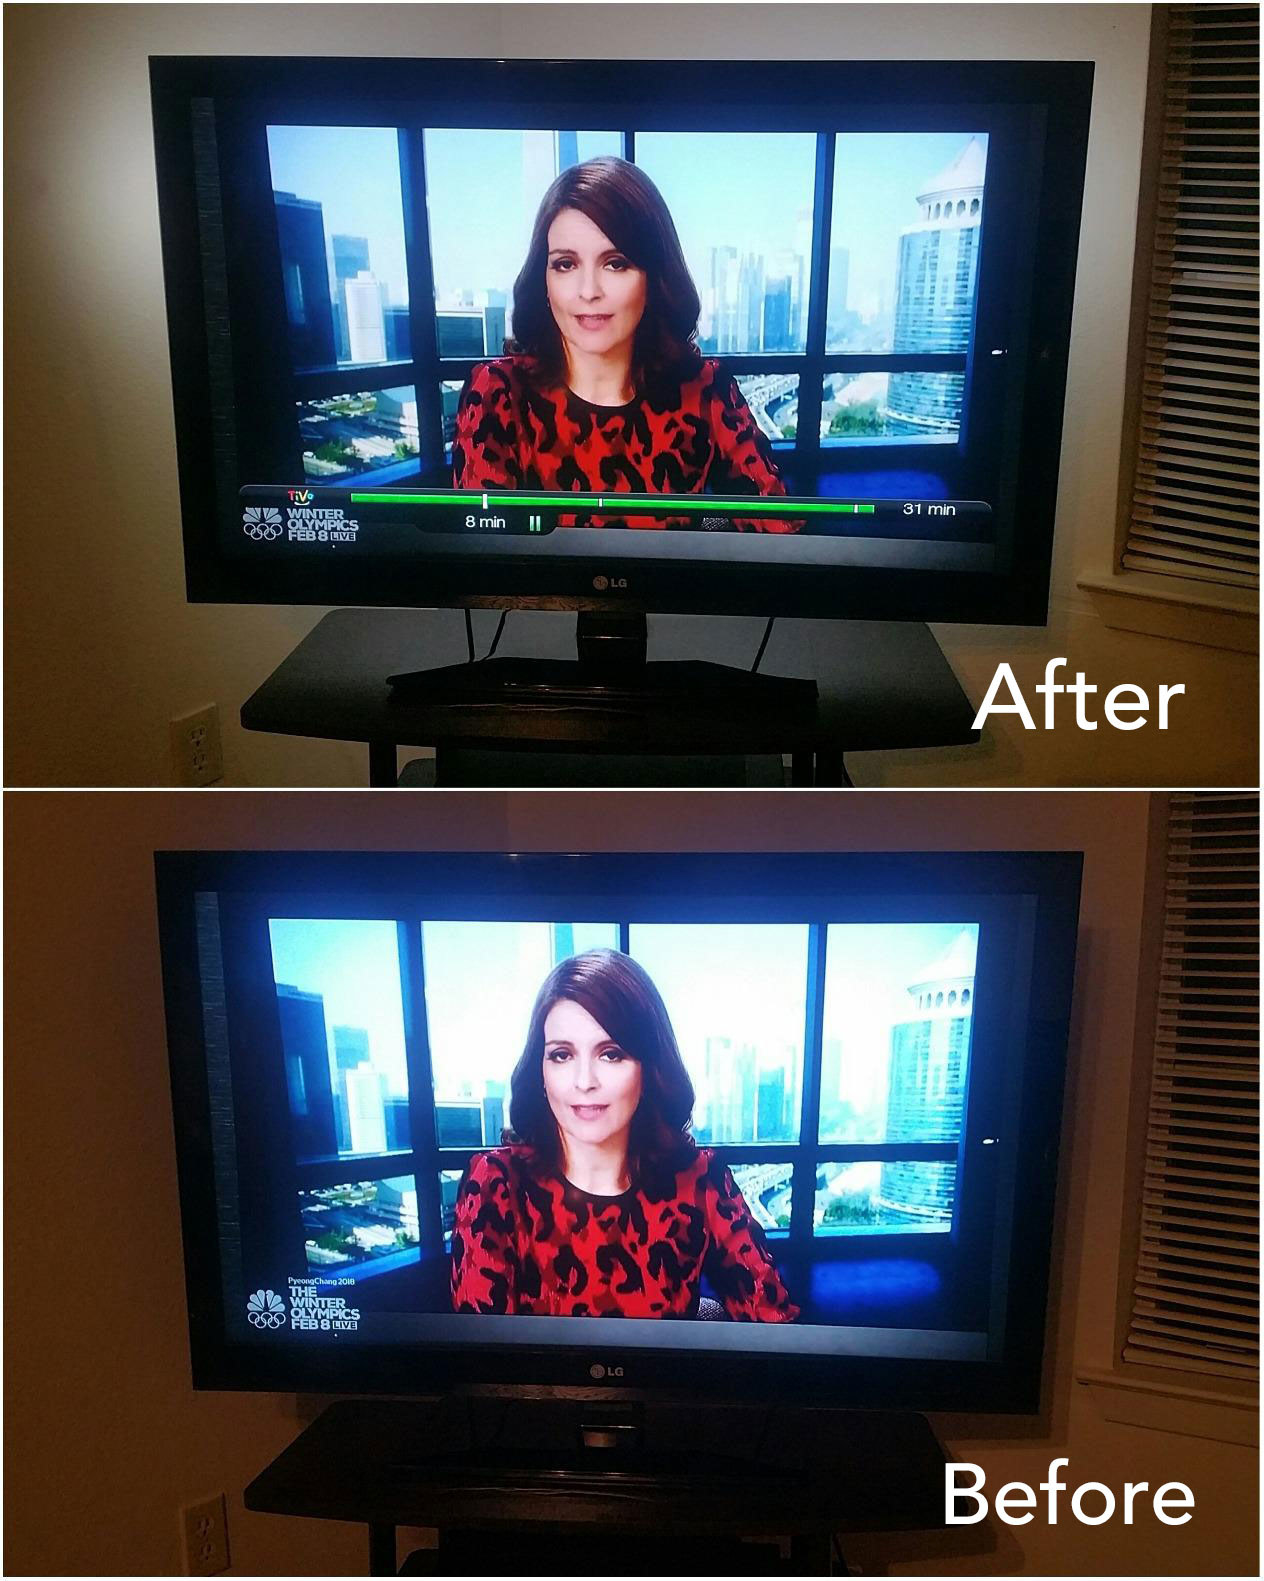 A reviewer&#x27;s before/after of their TV with backlighting: before with a less clear picture and brights that strain the eyes and after with clearer picture and backlighting on the wall